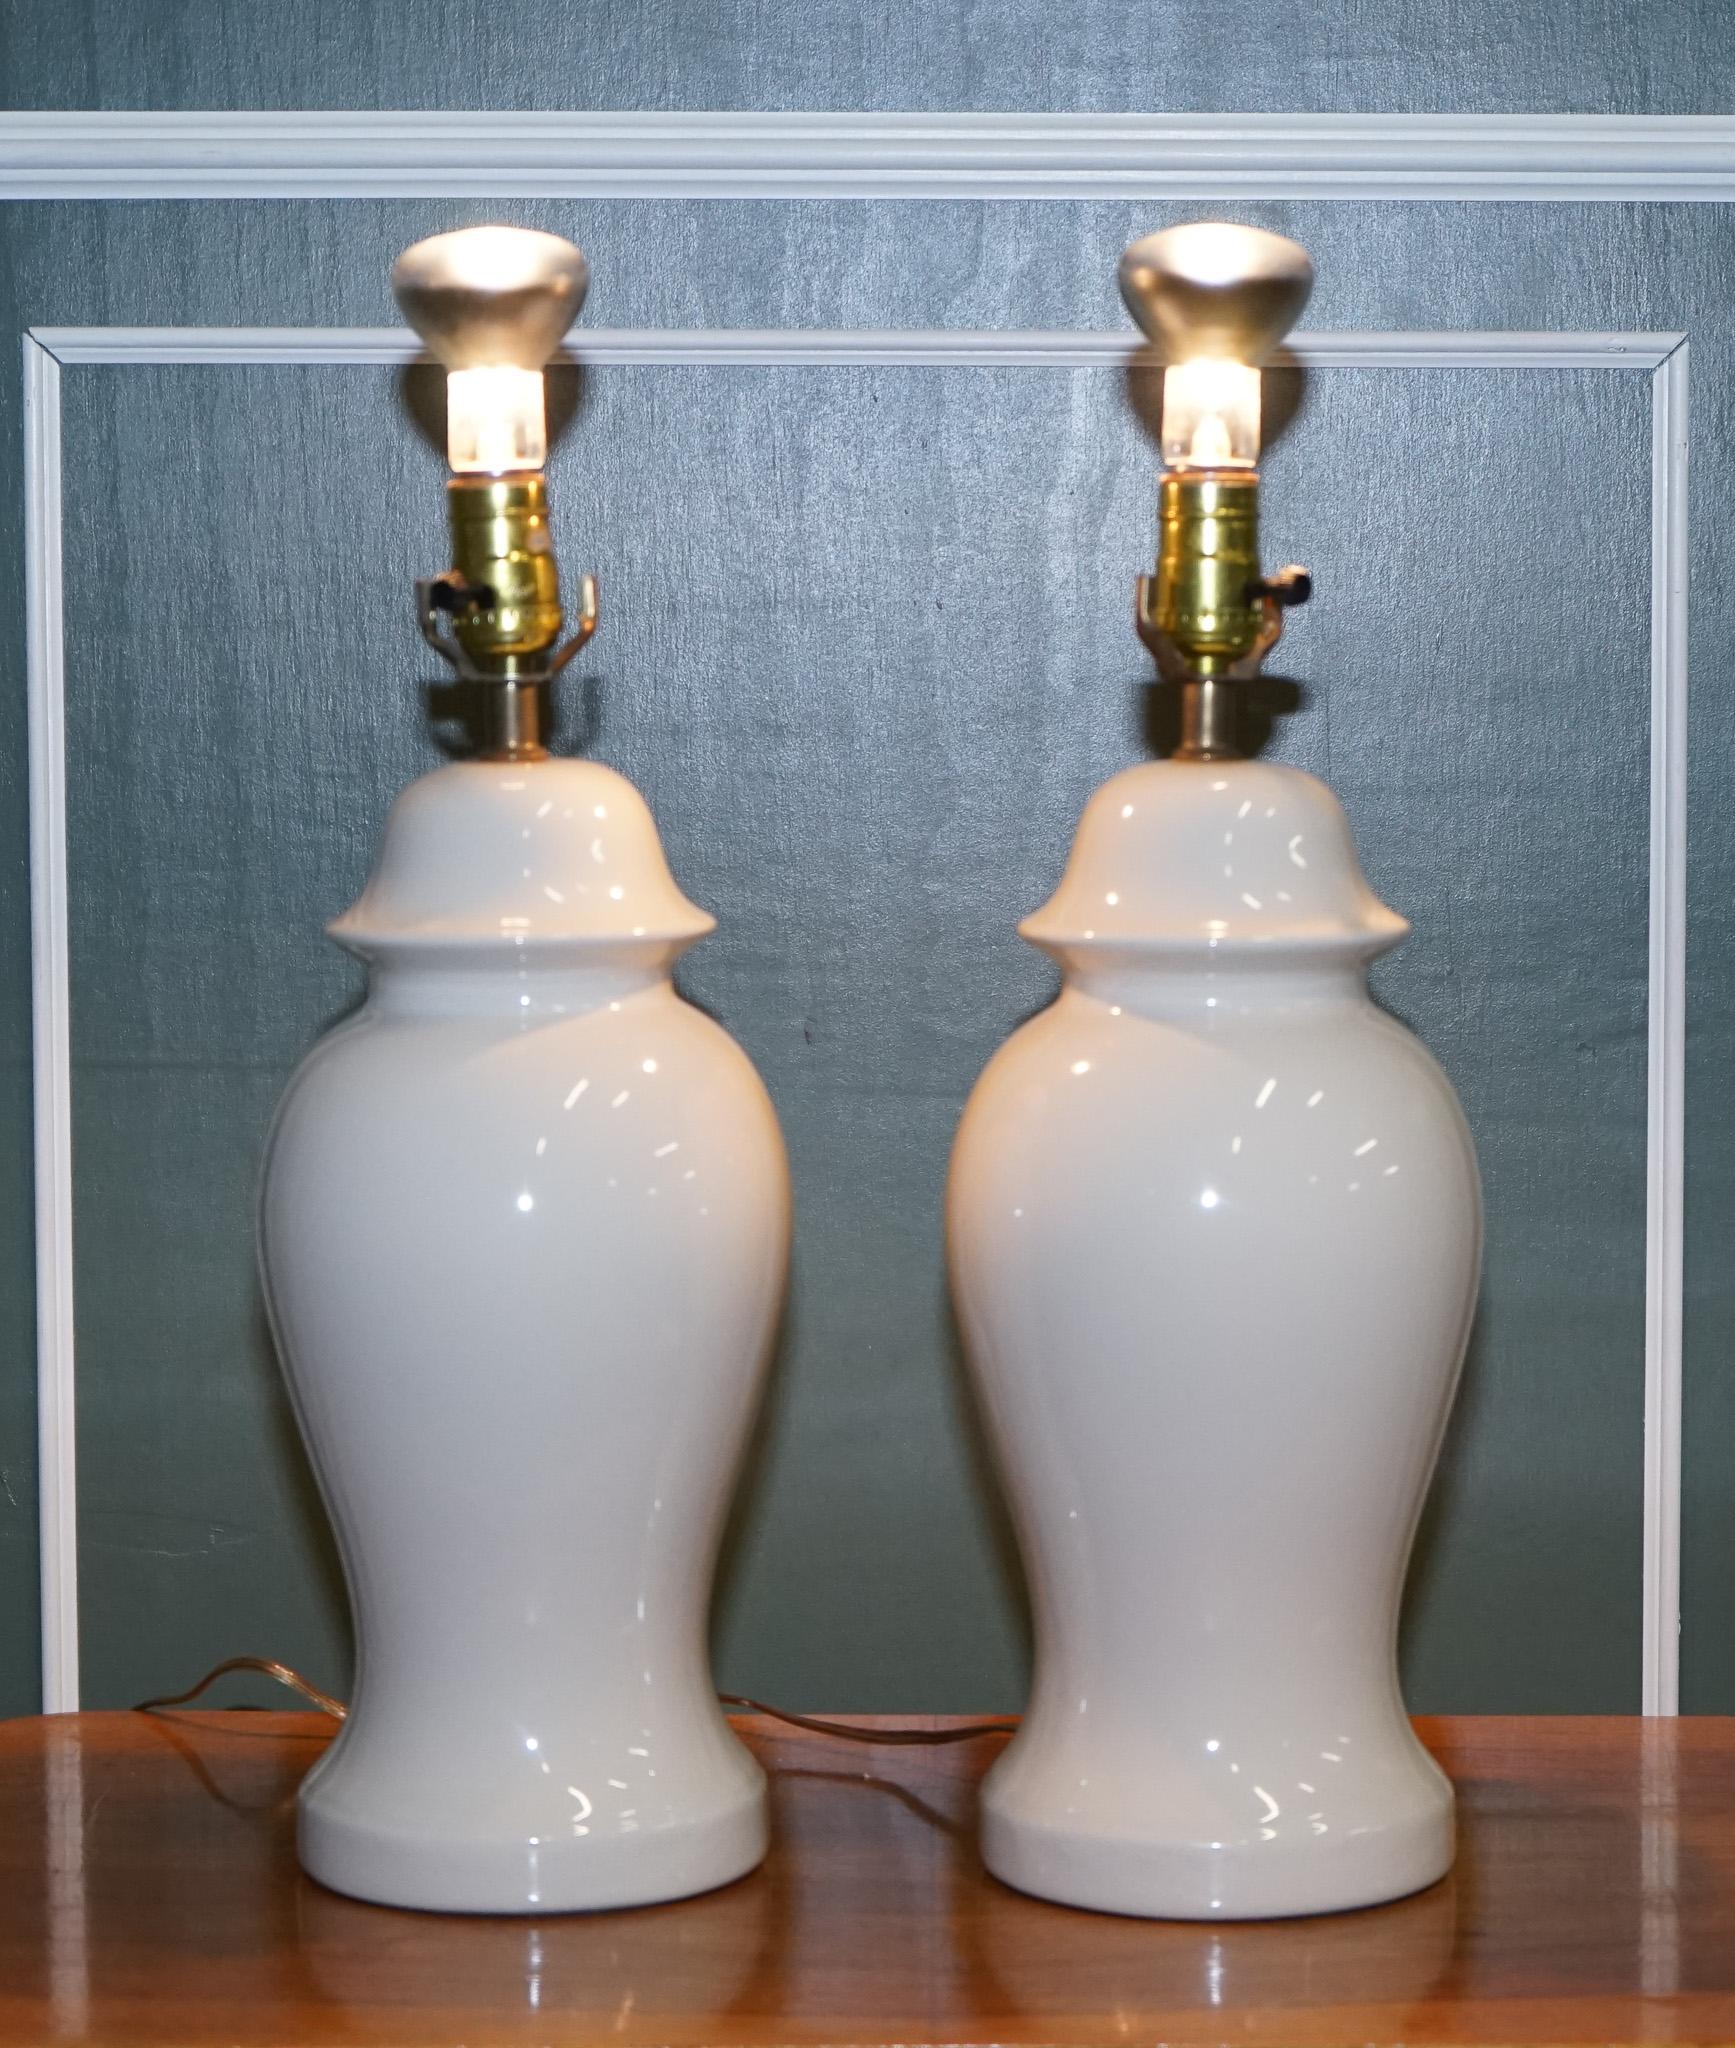 We are delighted to offer for sale this Lovely, circa 1970s vintage Porcelain cream pair of lamps

Please carefully examine the pictures to see the condition before purchasing, as they form part of the description. 

Measurements

Height - 46